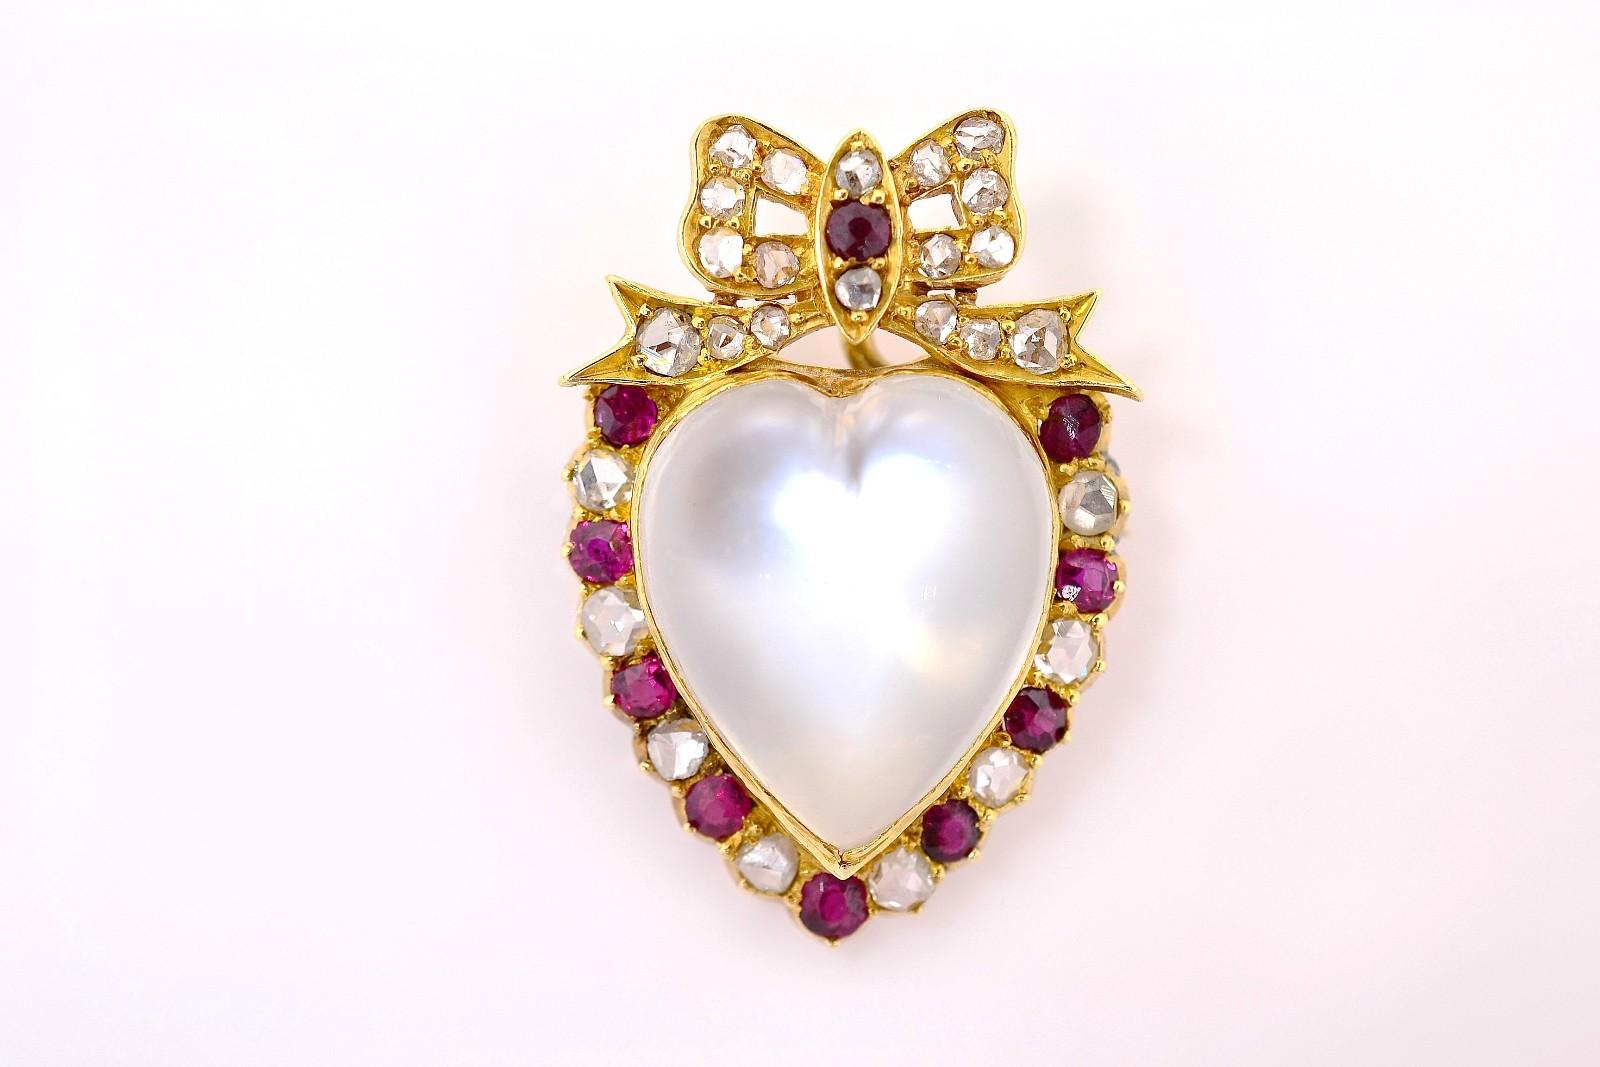 The 1890's brings us this hand created one-of-a kind gorgeous Moonstone bauble, both a brooch and pendant.  A beautiful heart-shaped bluish Moonstone is bezel-set in an 18KT yellow gold frame.  An encrusted bow sits atop and Rose cut Diamonds and